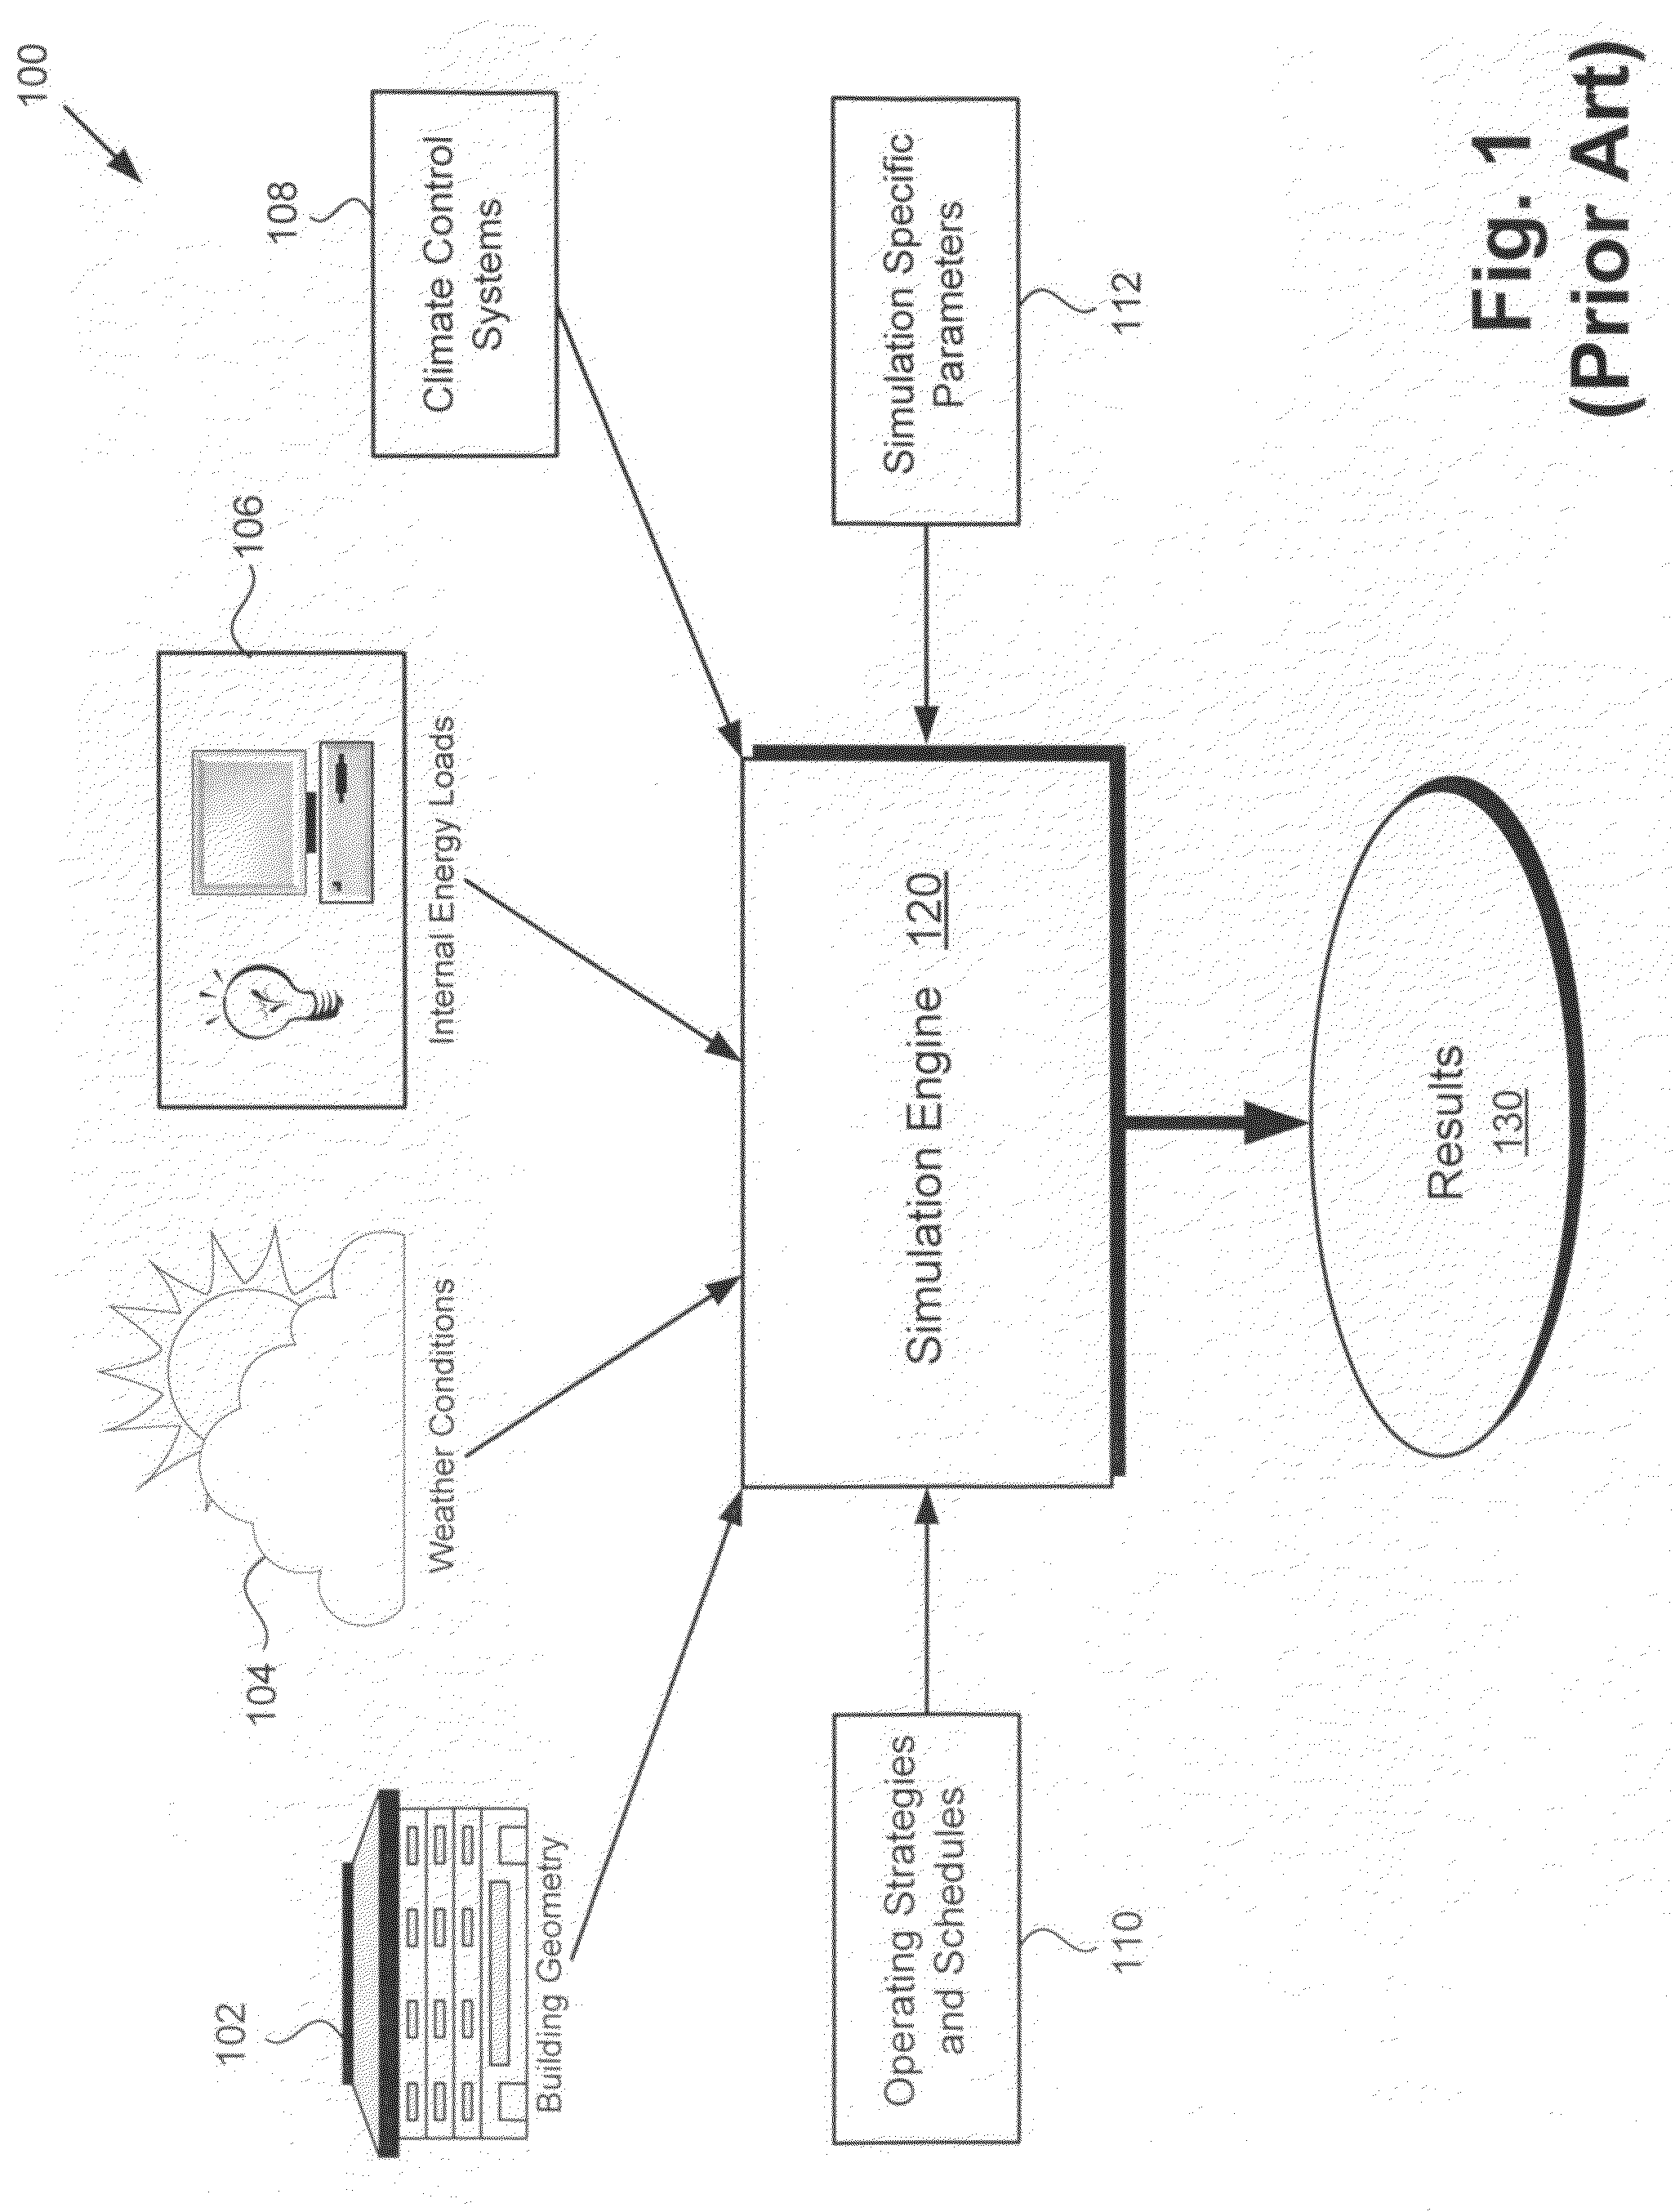 Method and system for estimating building performance